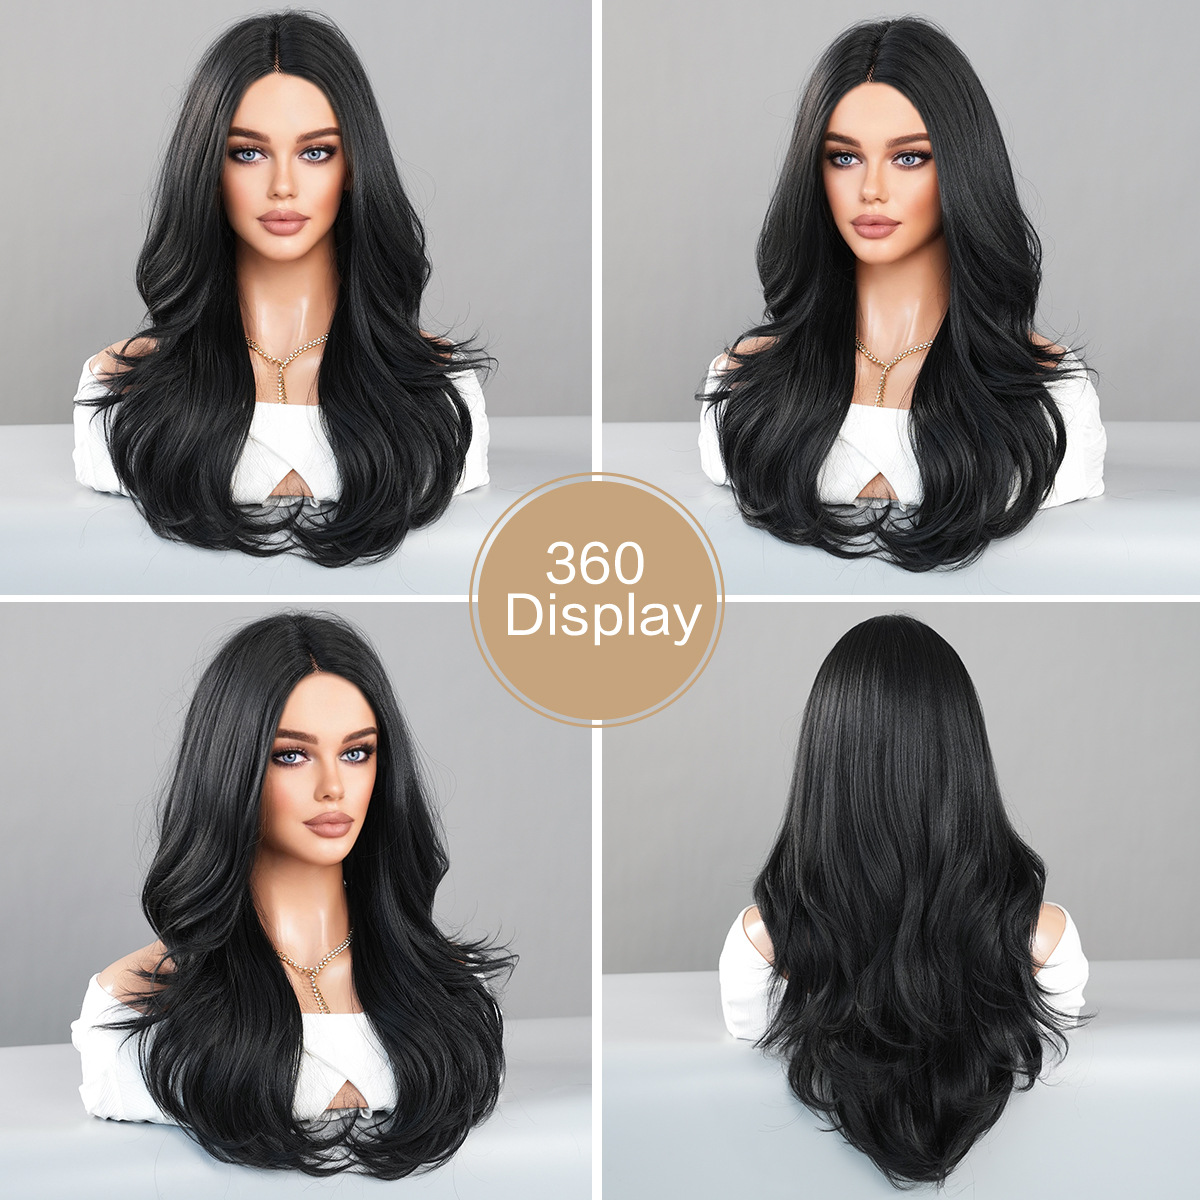 Stylish synthetic wig with small T lace, featuring natural black medium-parted long curly hair